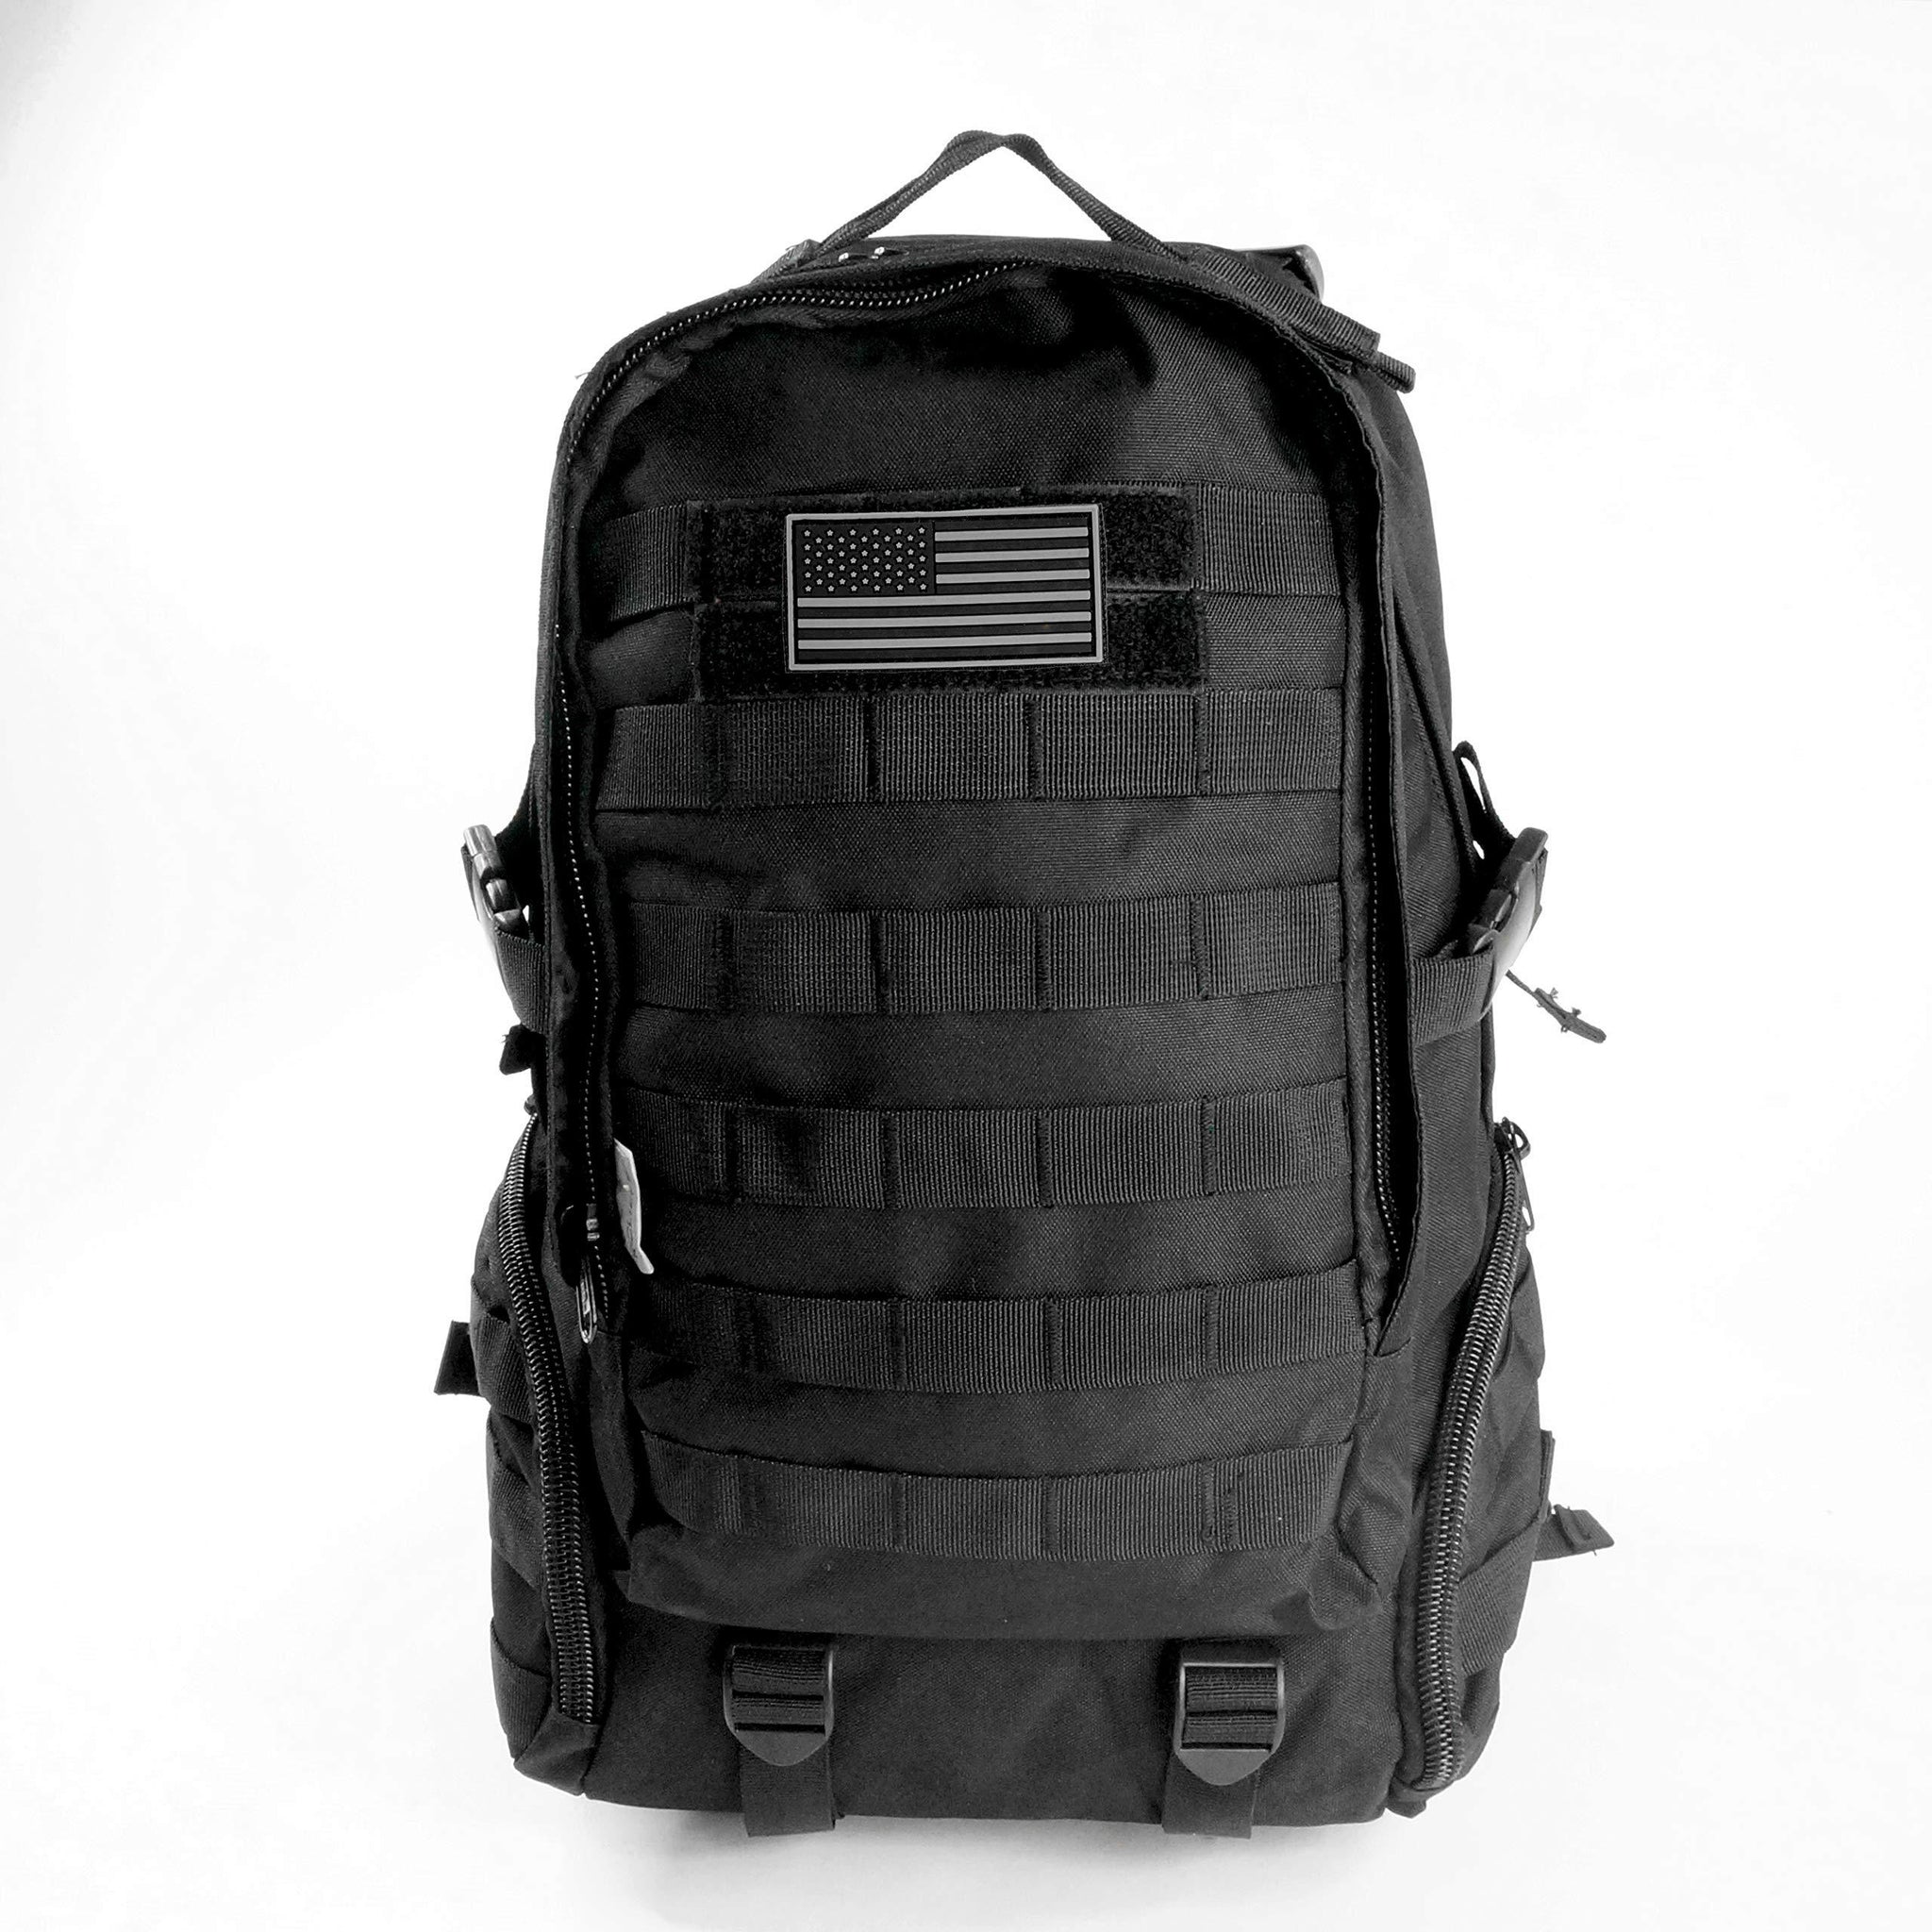 Military Tactical Backpack Daypack Bug Out Bag for Hiking Camping School  Travel